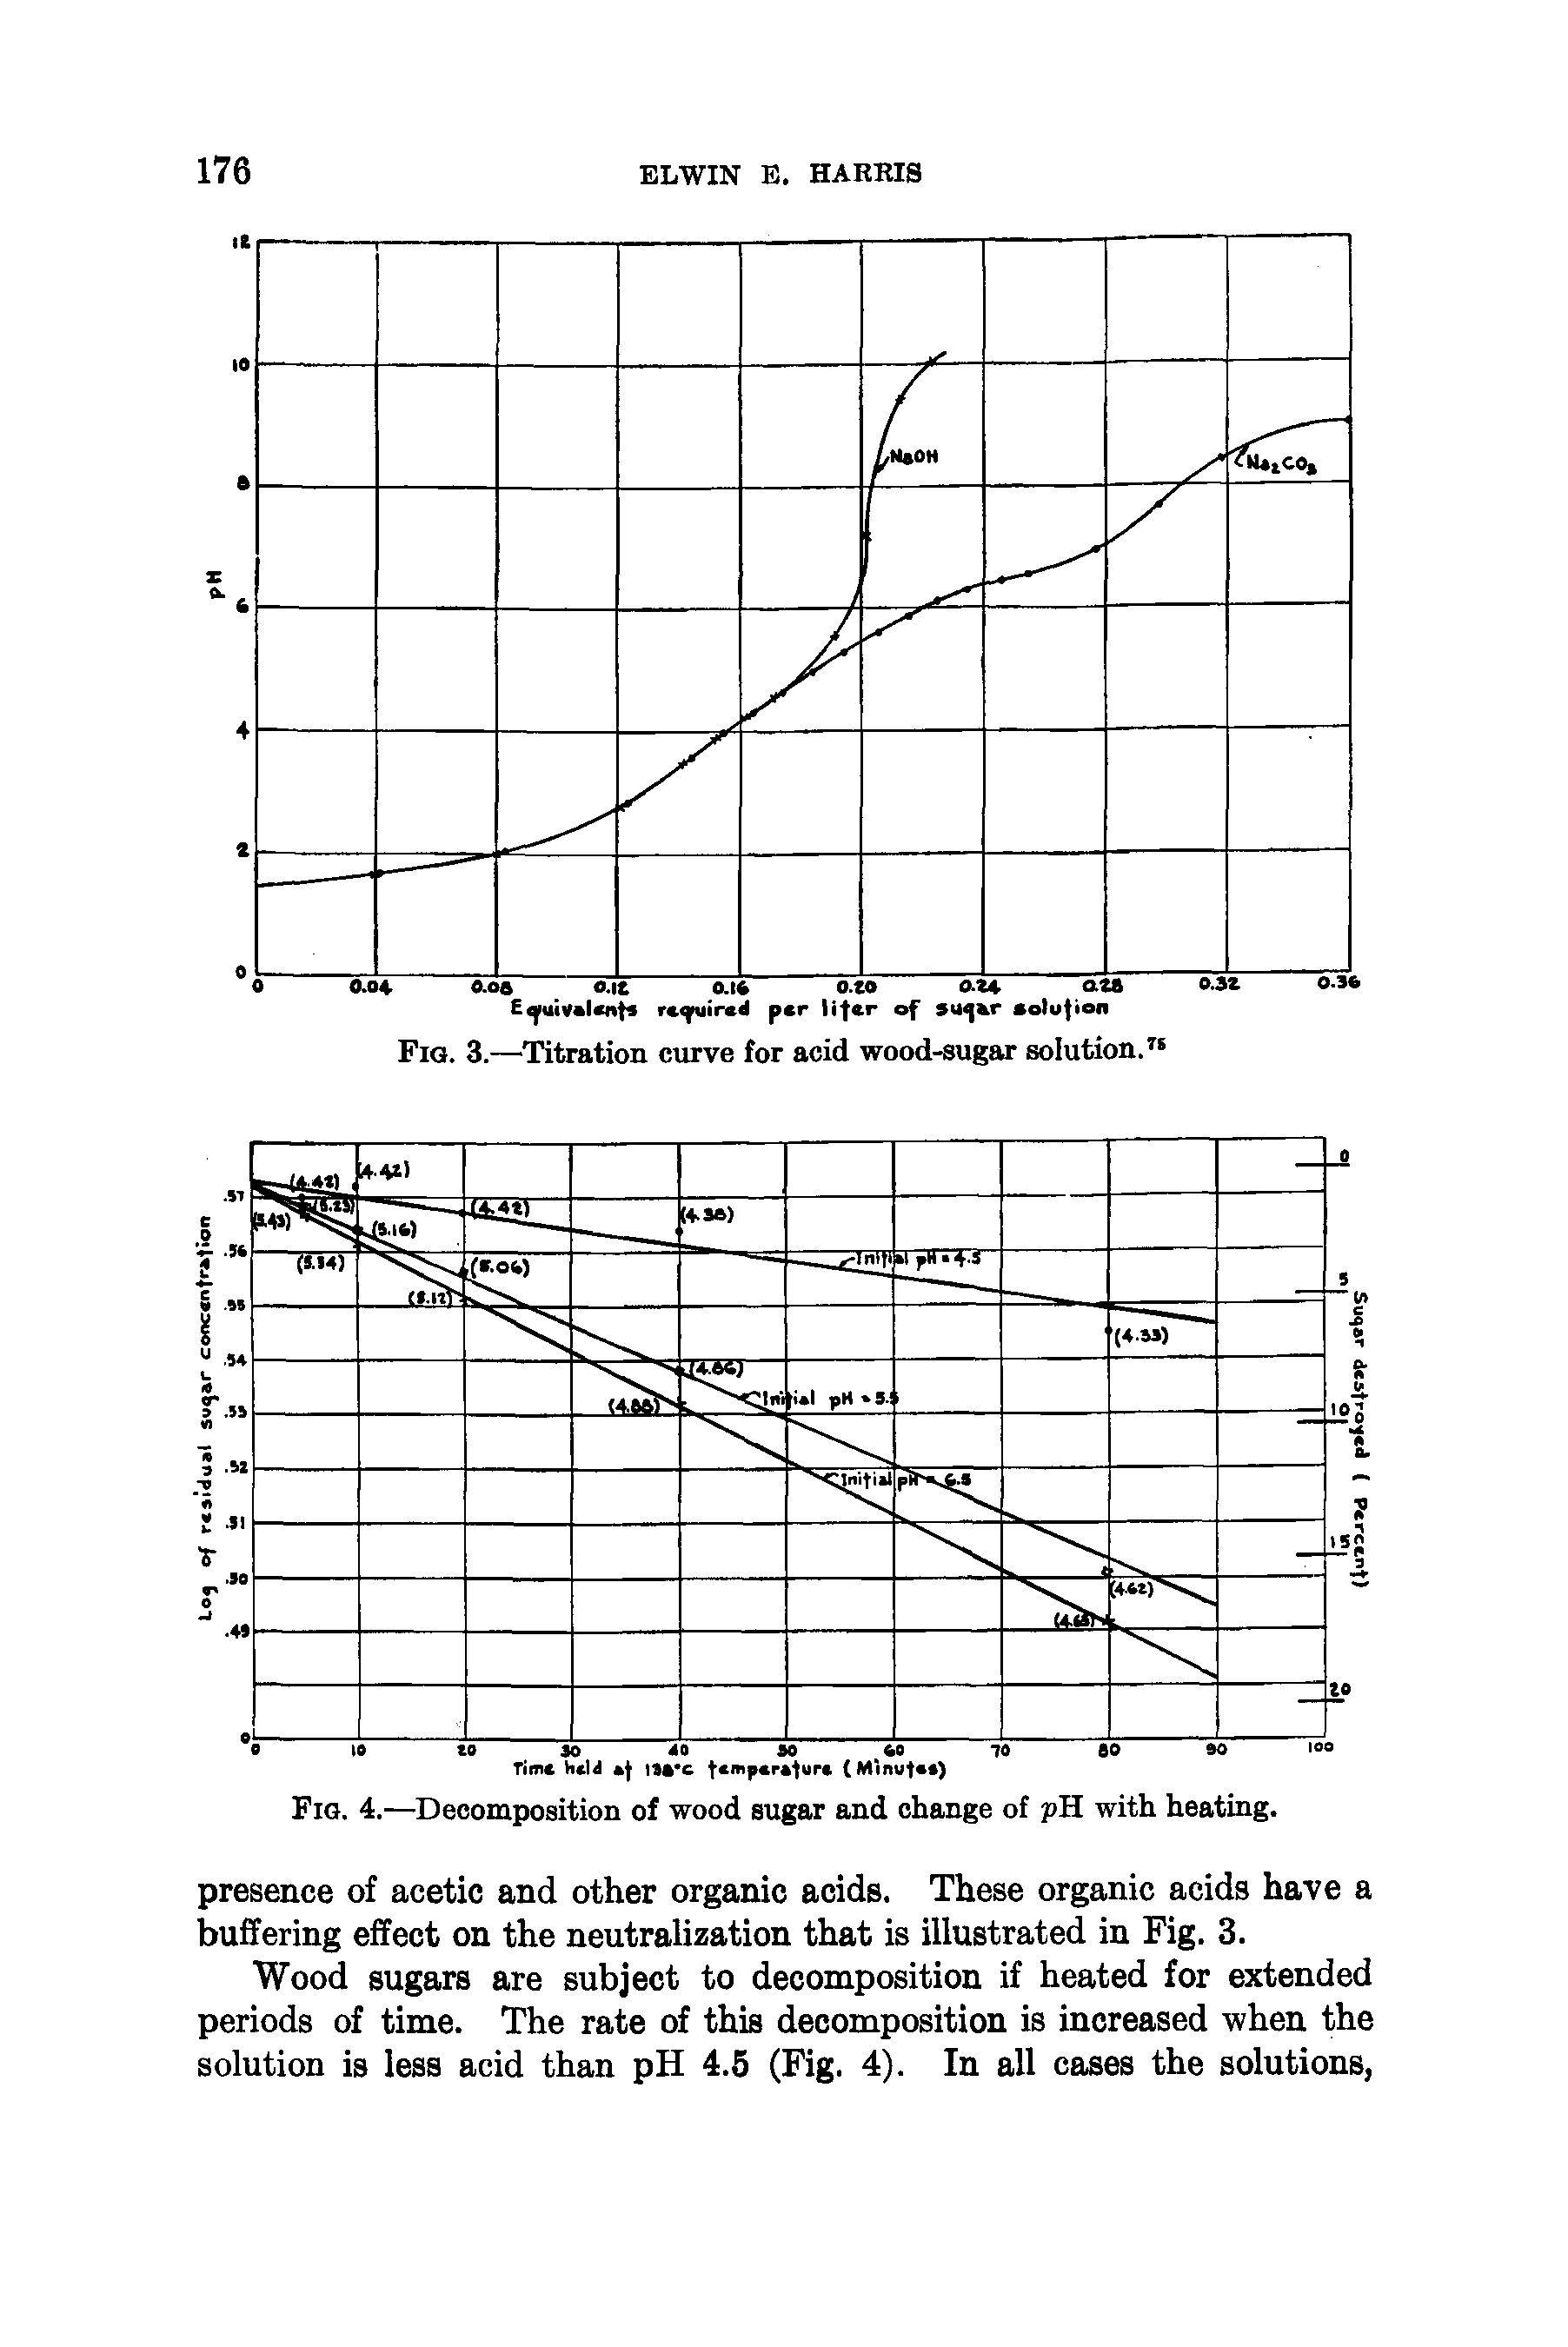 Fig. 4.—Decomposition of wood sugar and change of pH with heating.